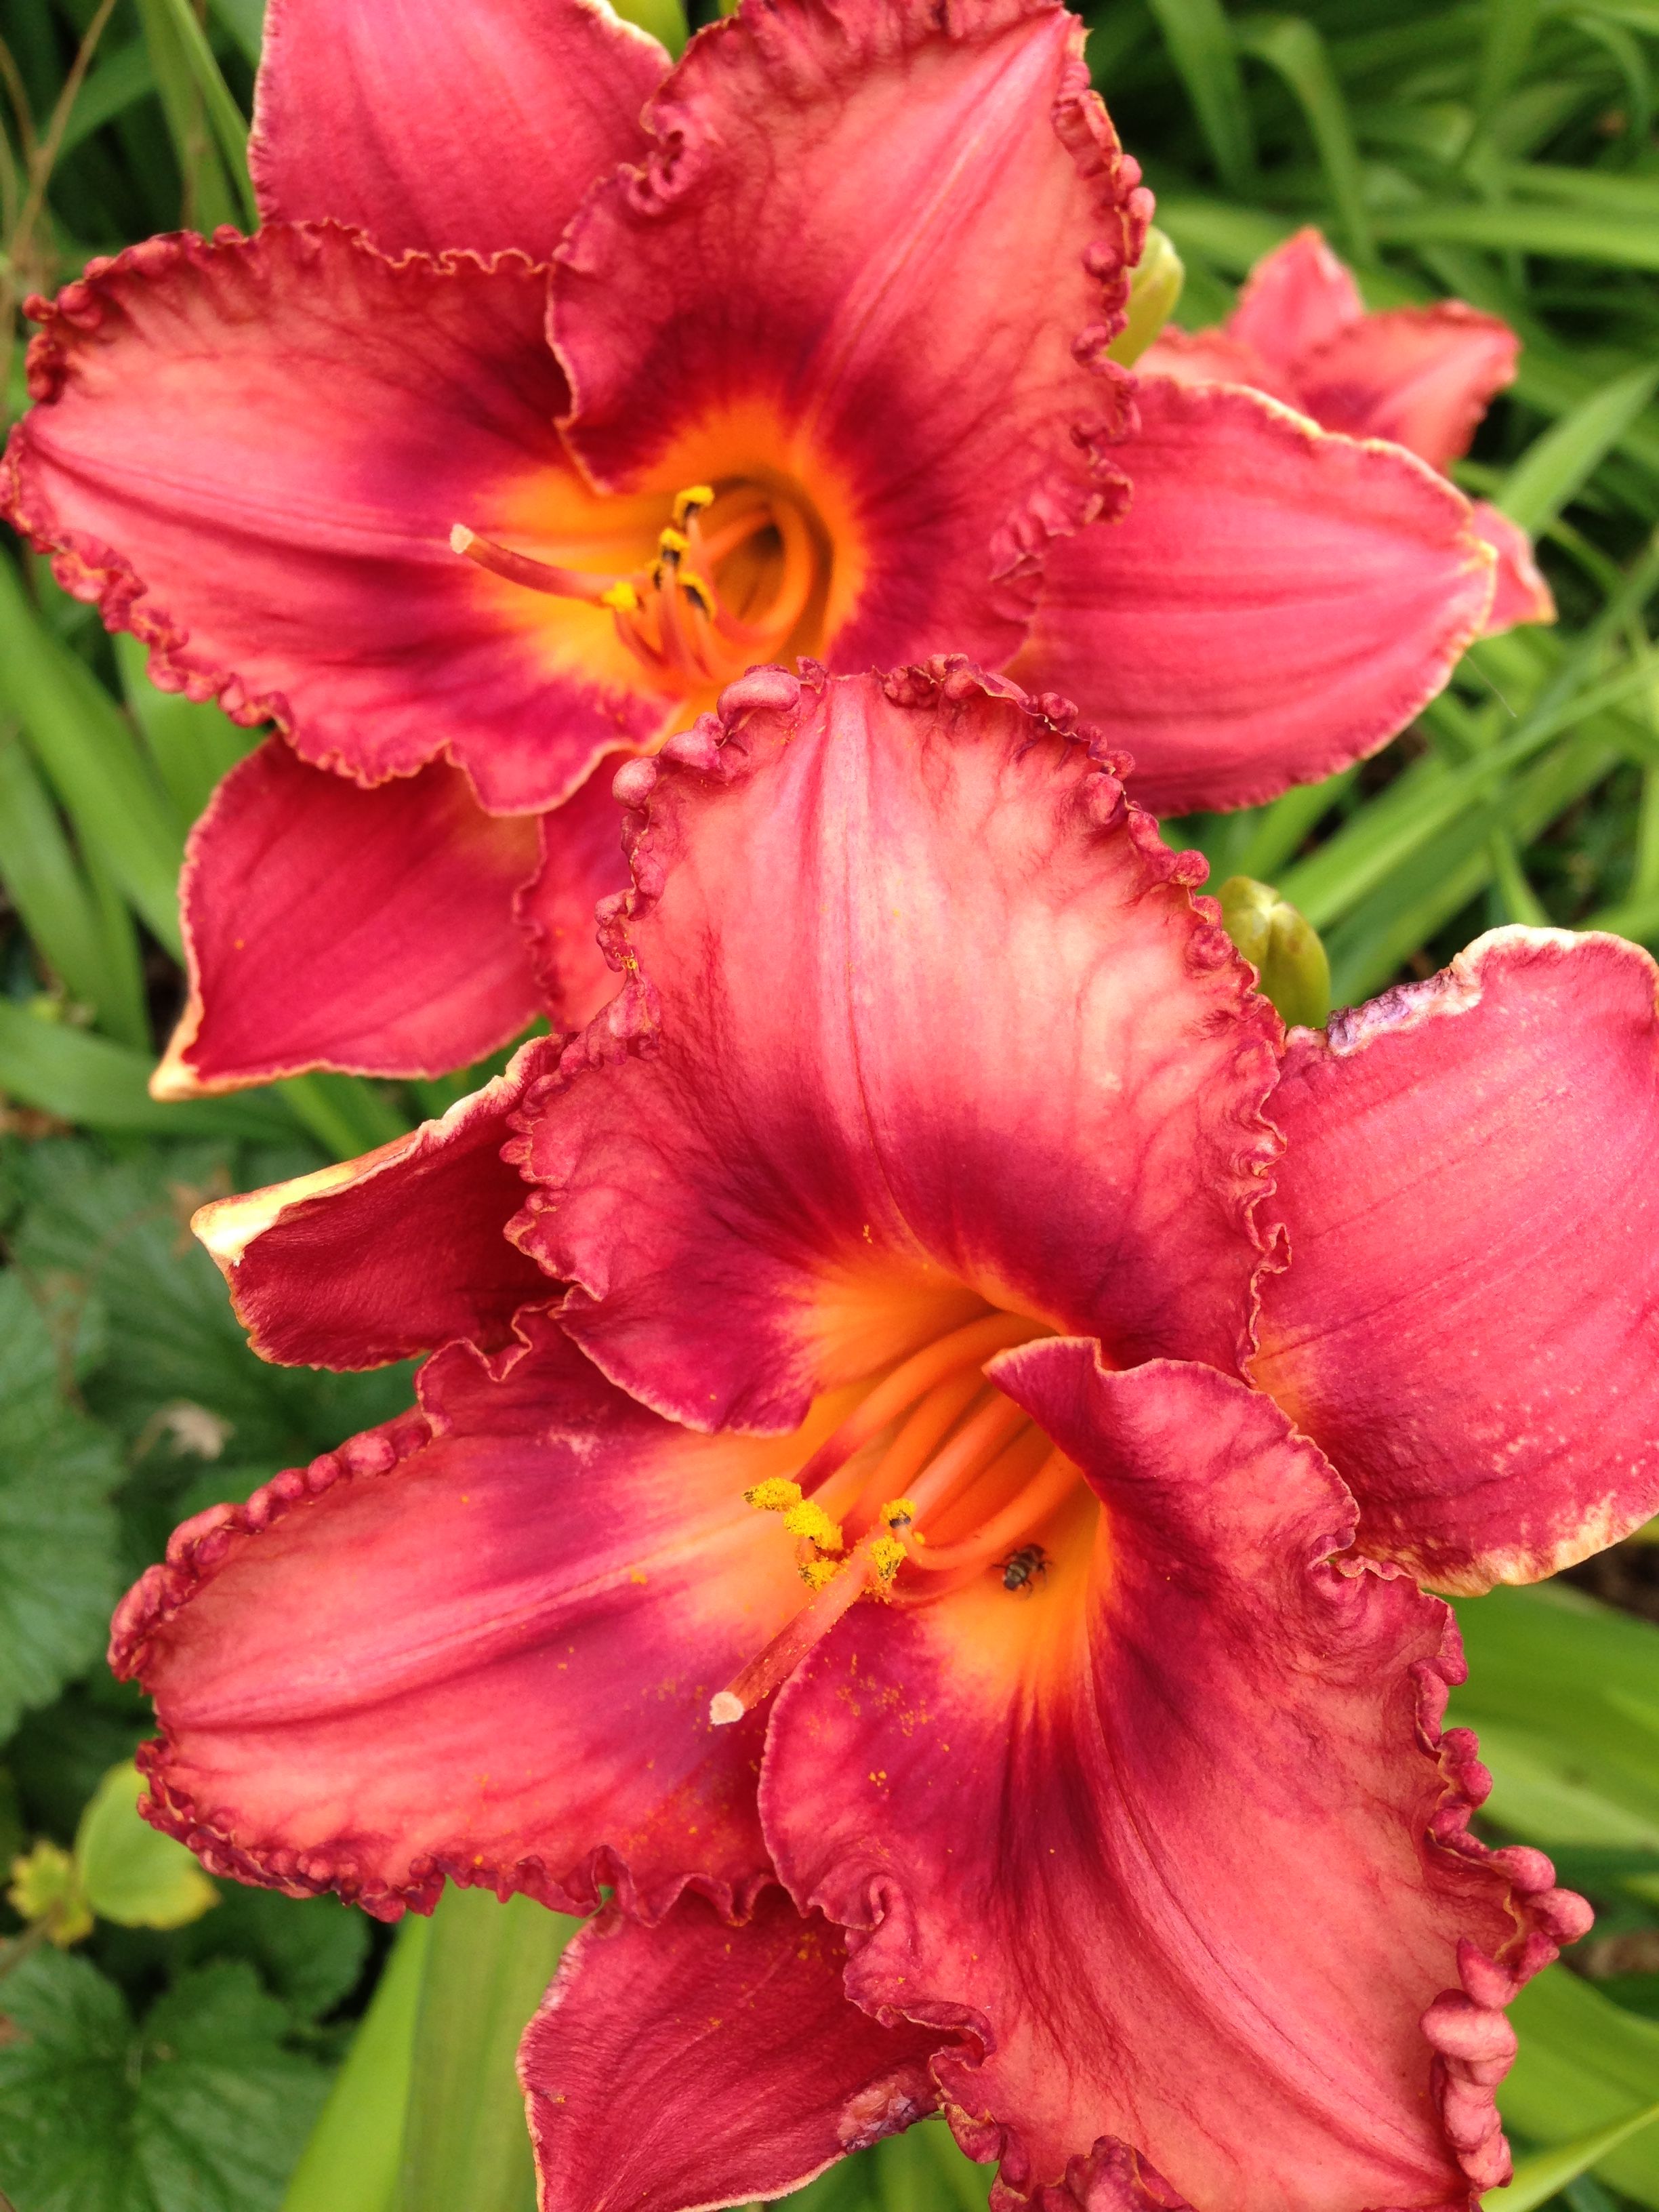 Cherry P. reccomend Asian occassion daylily